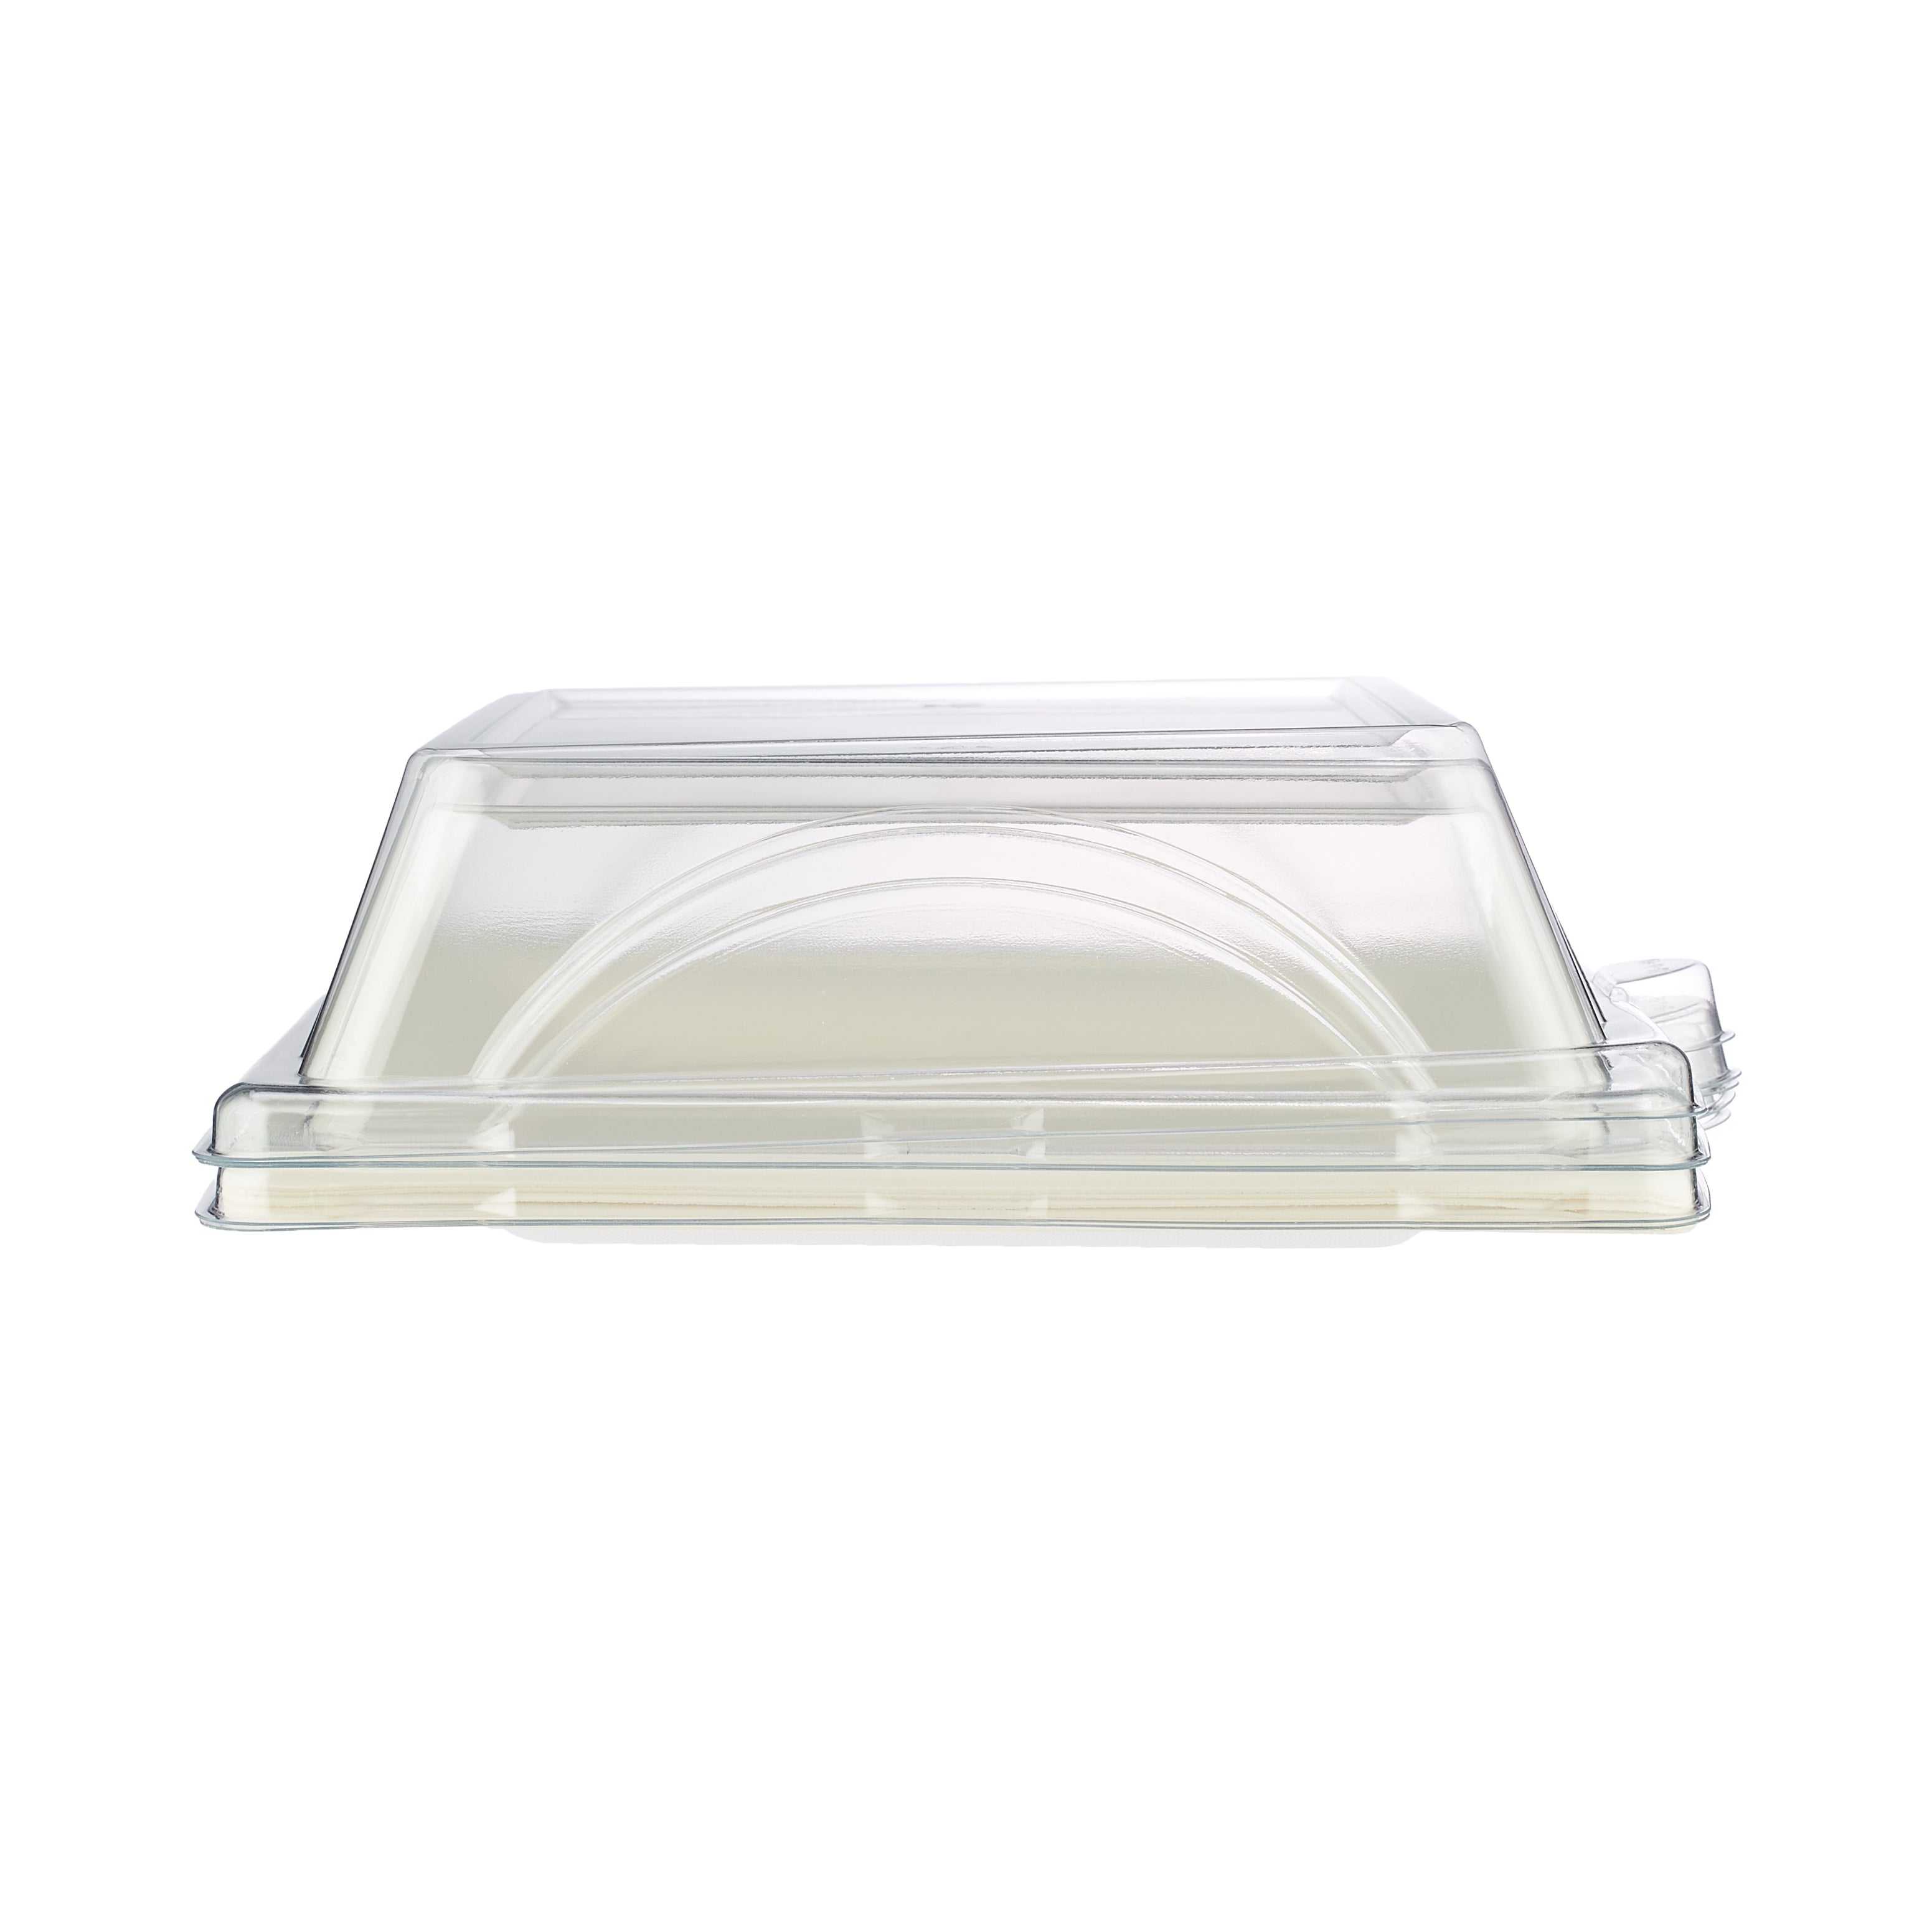 200 Pieces Bio-Degradable Square Plate With Lid 10 Inch